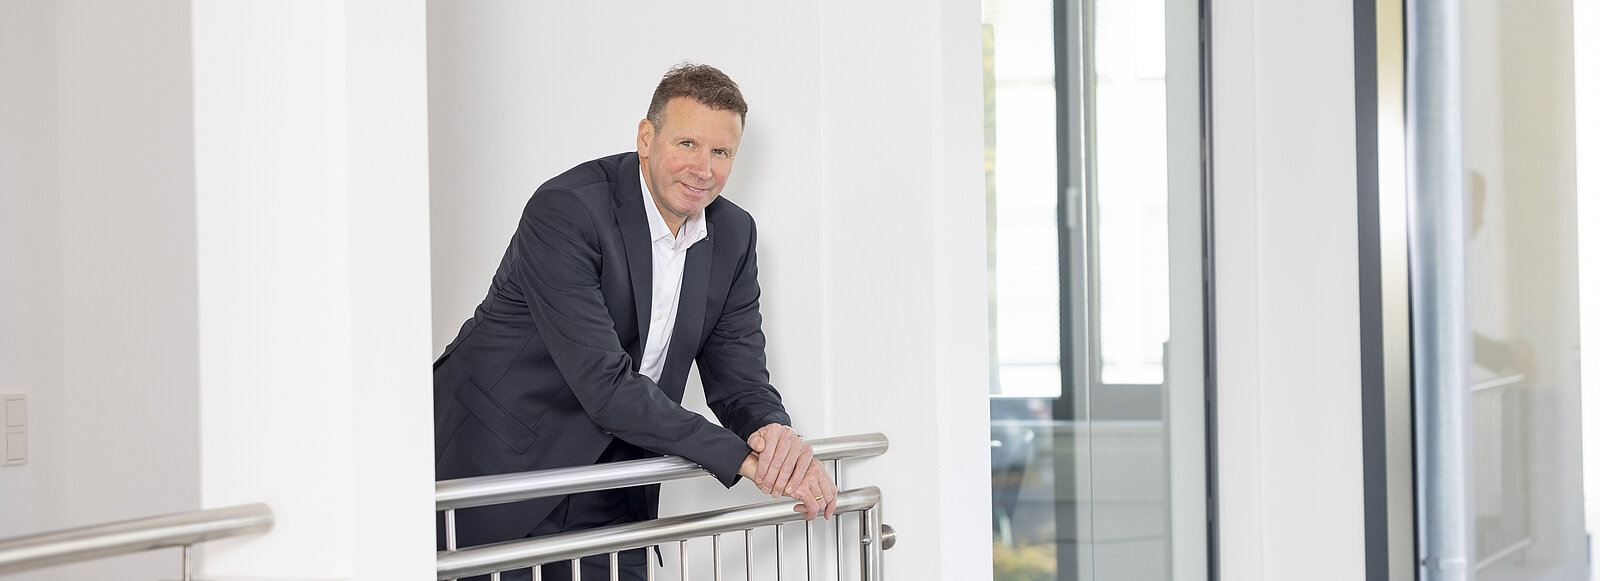 Managing Director Ralf Siefen in the foyer of the Data Center Group headquarters